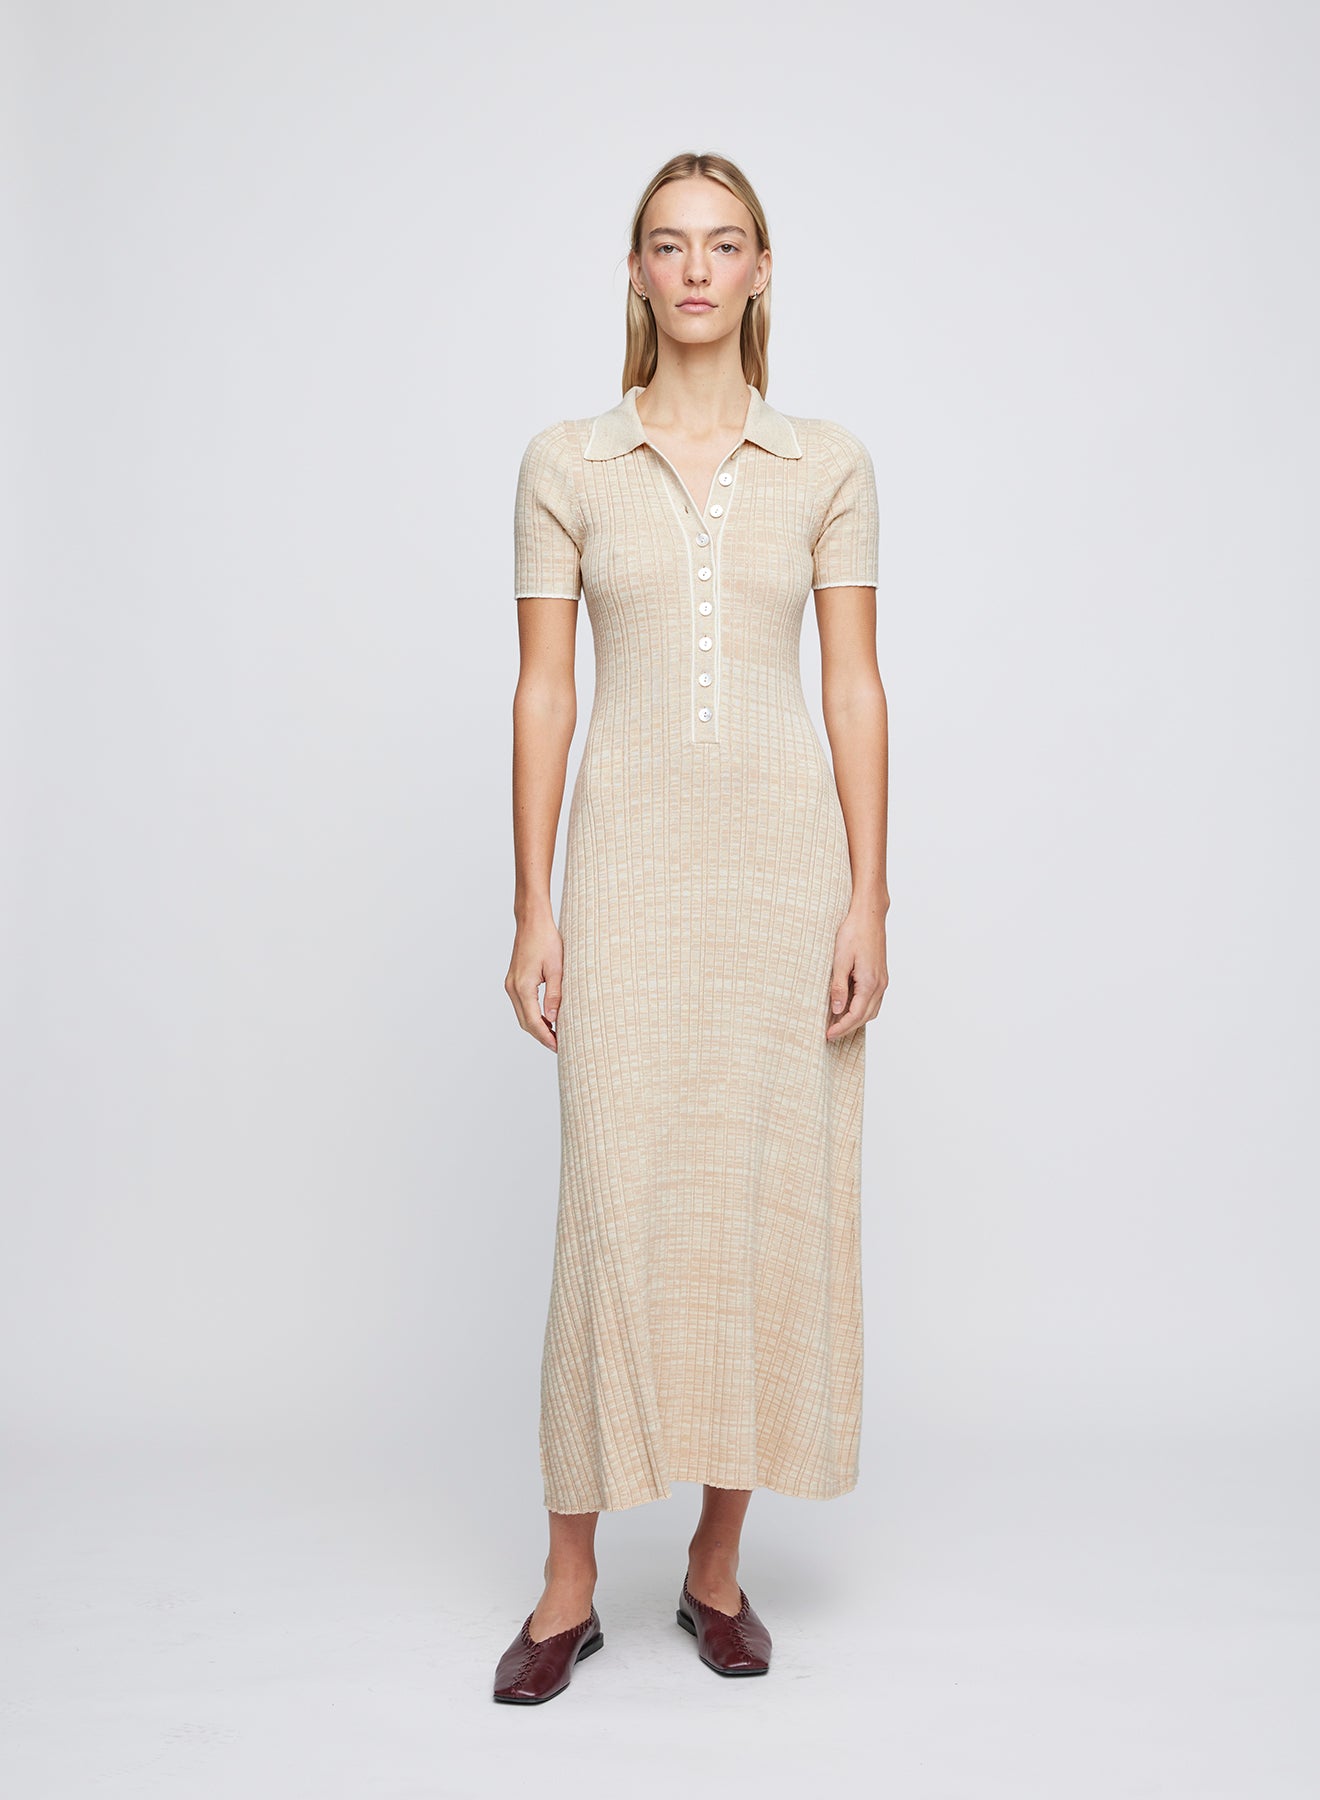 The ANNA QUAN Penelope Dress in Sand Dune is the dress for any occasion, designed in a soft 100% cotton rib that stretches and sculpts the body. Designed with a polo inspired button placket and contrast trimming.